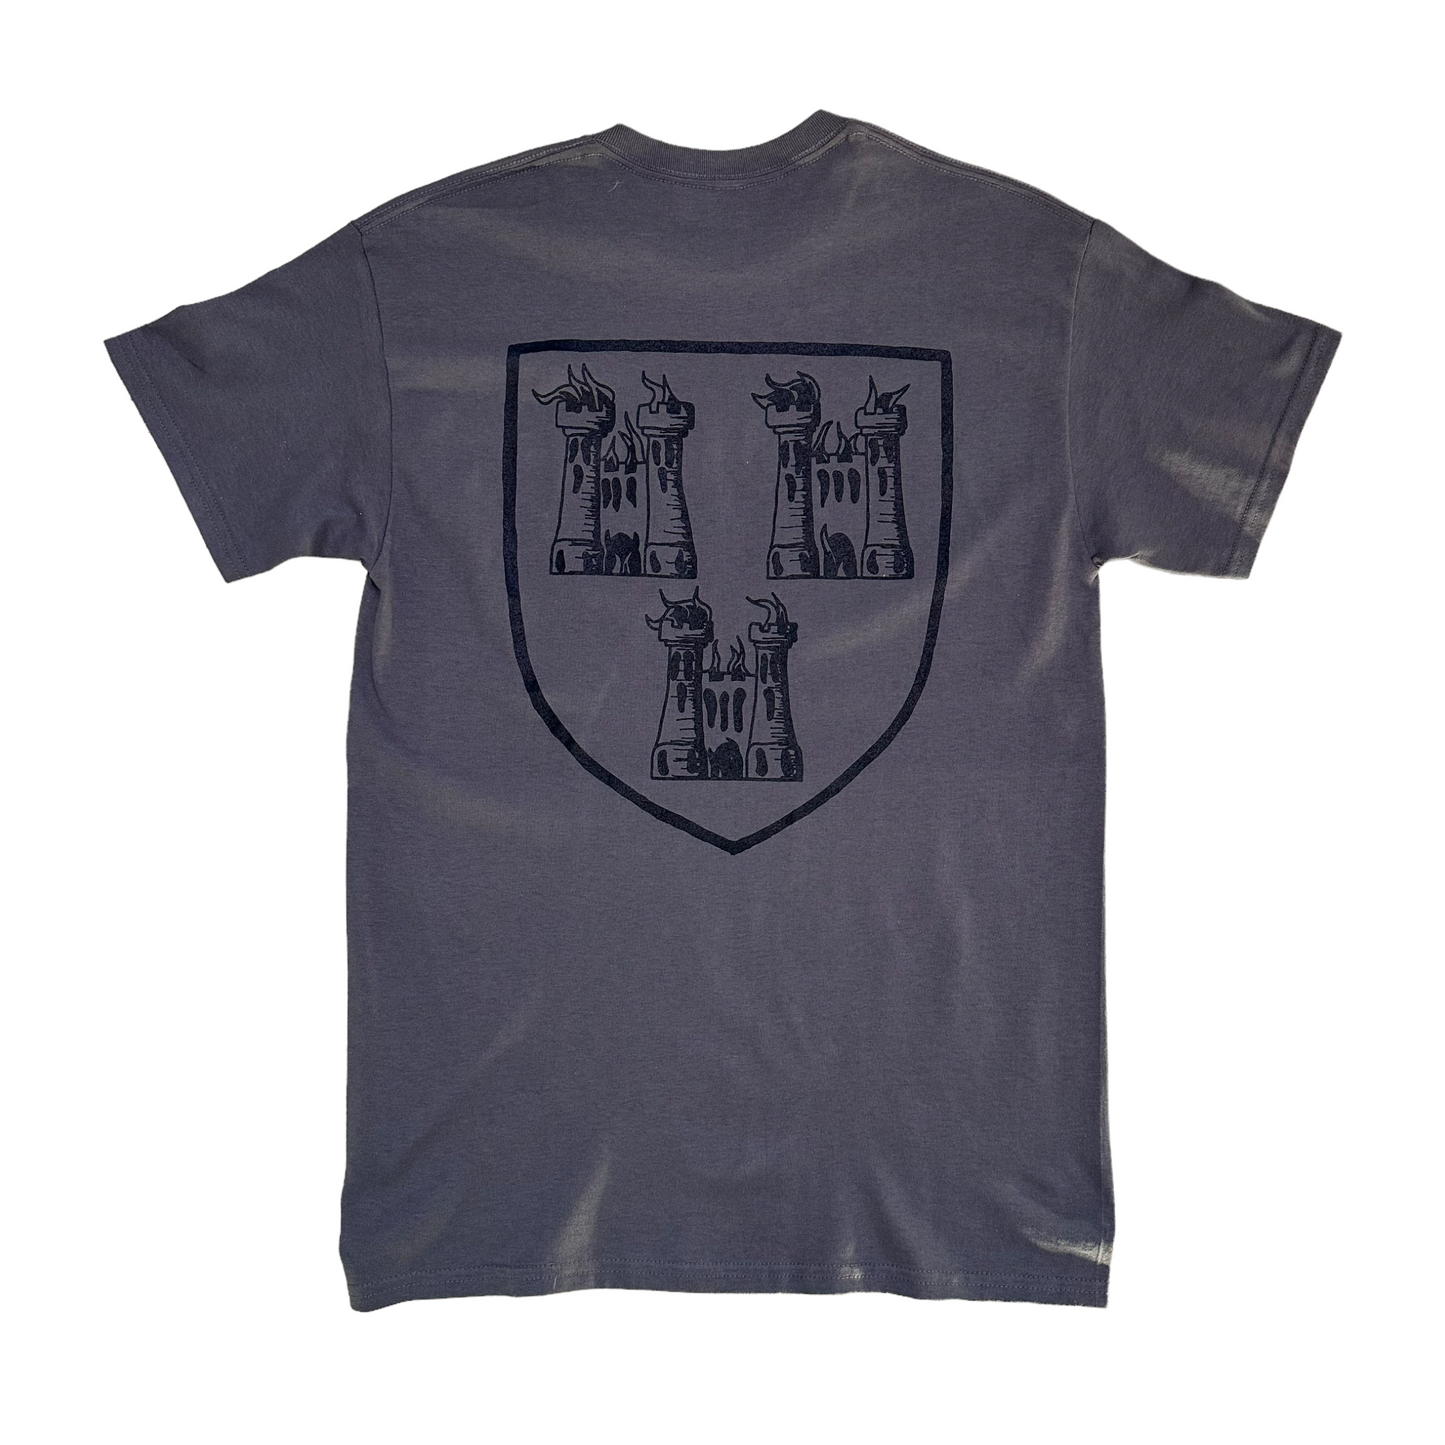 High Rollers - Coat of Arms Tee - Charcoal/Black